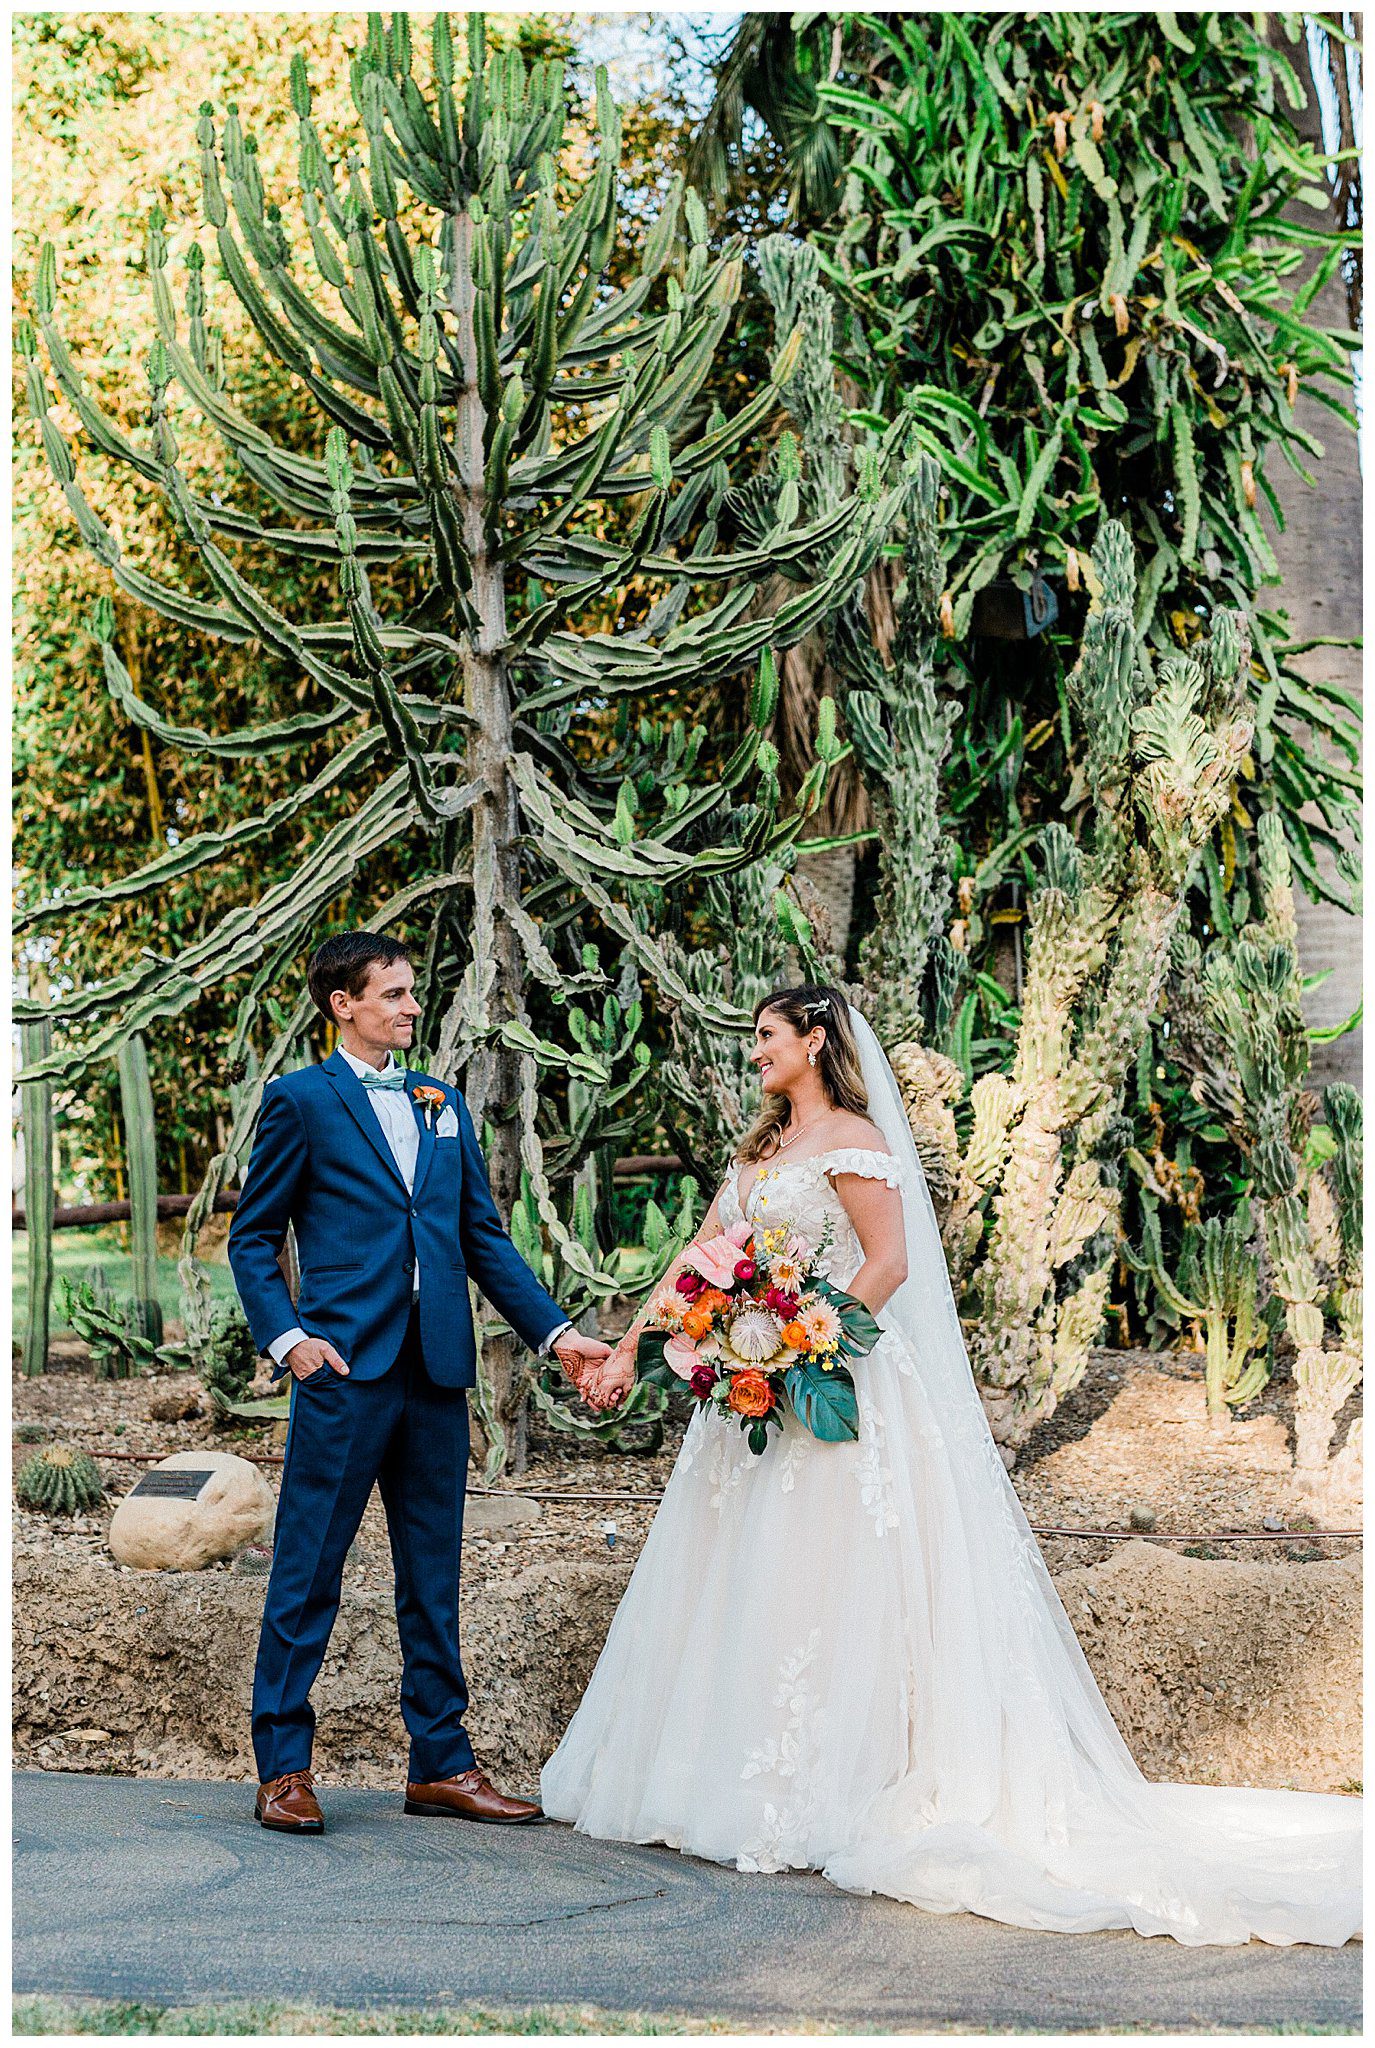 A bride and groom and wedding attire stand in front of a giant cactus in the garden at the Santa Barbara zoo at their wedding.